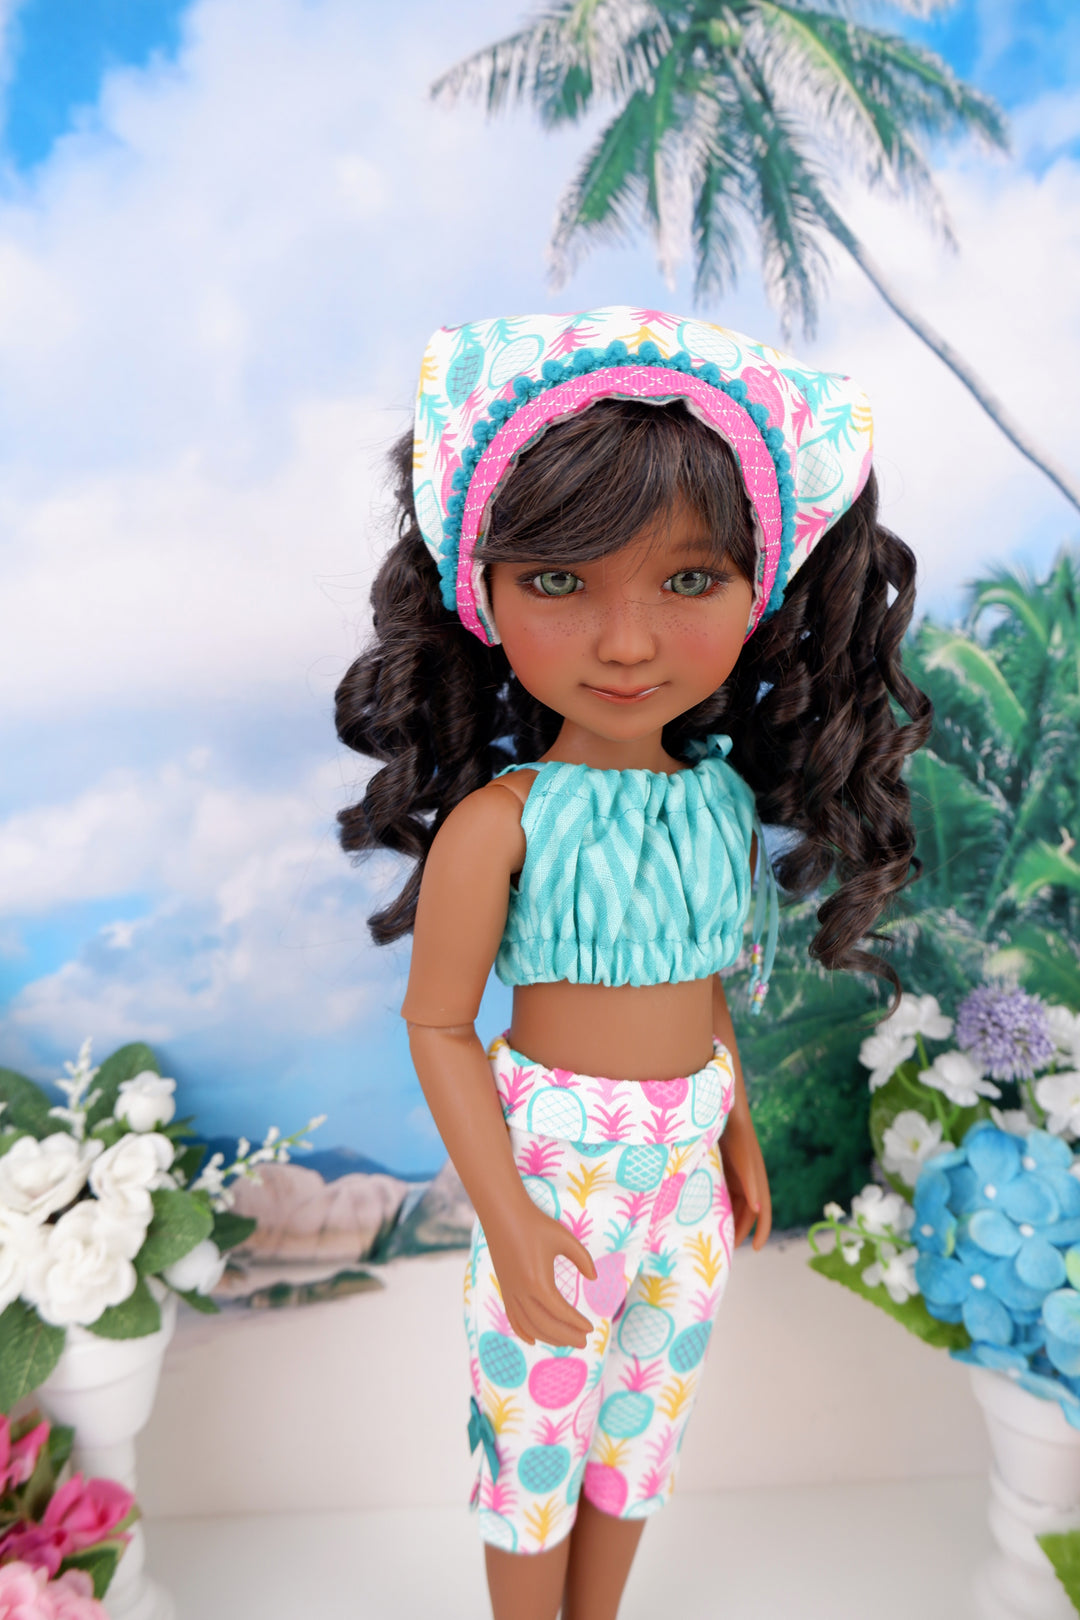 Tropic Pineapple - crop top & capris with sandals for Ruby Red Fashion Friends doll